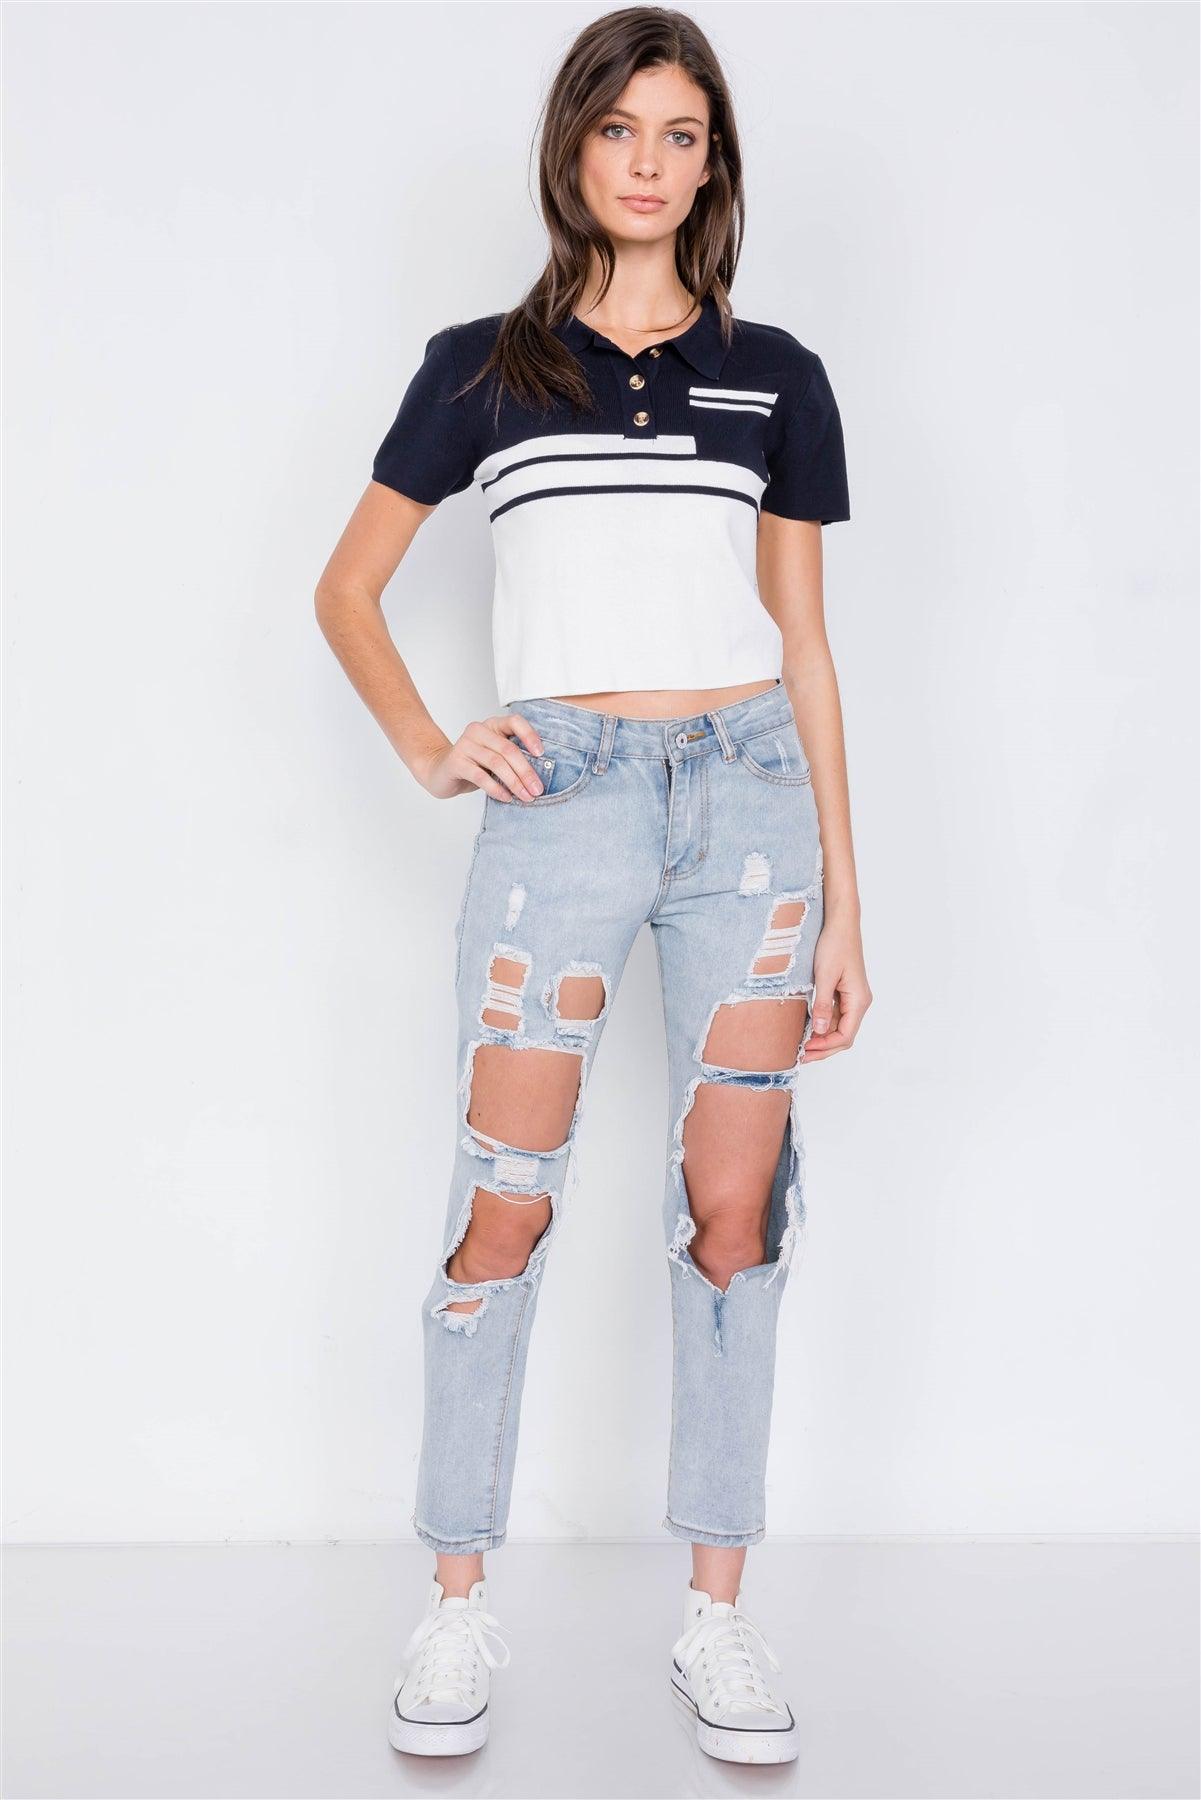 Navy & White Color Block Crop Polo Short Sleeve T-Shirt